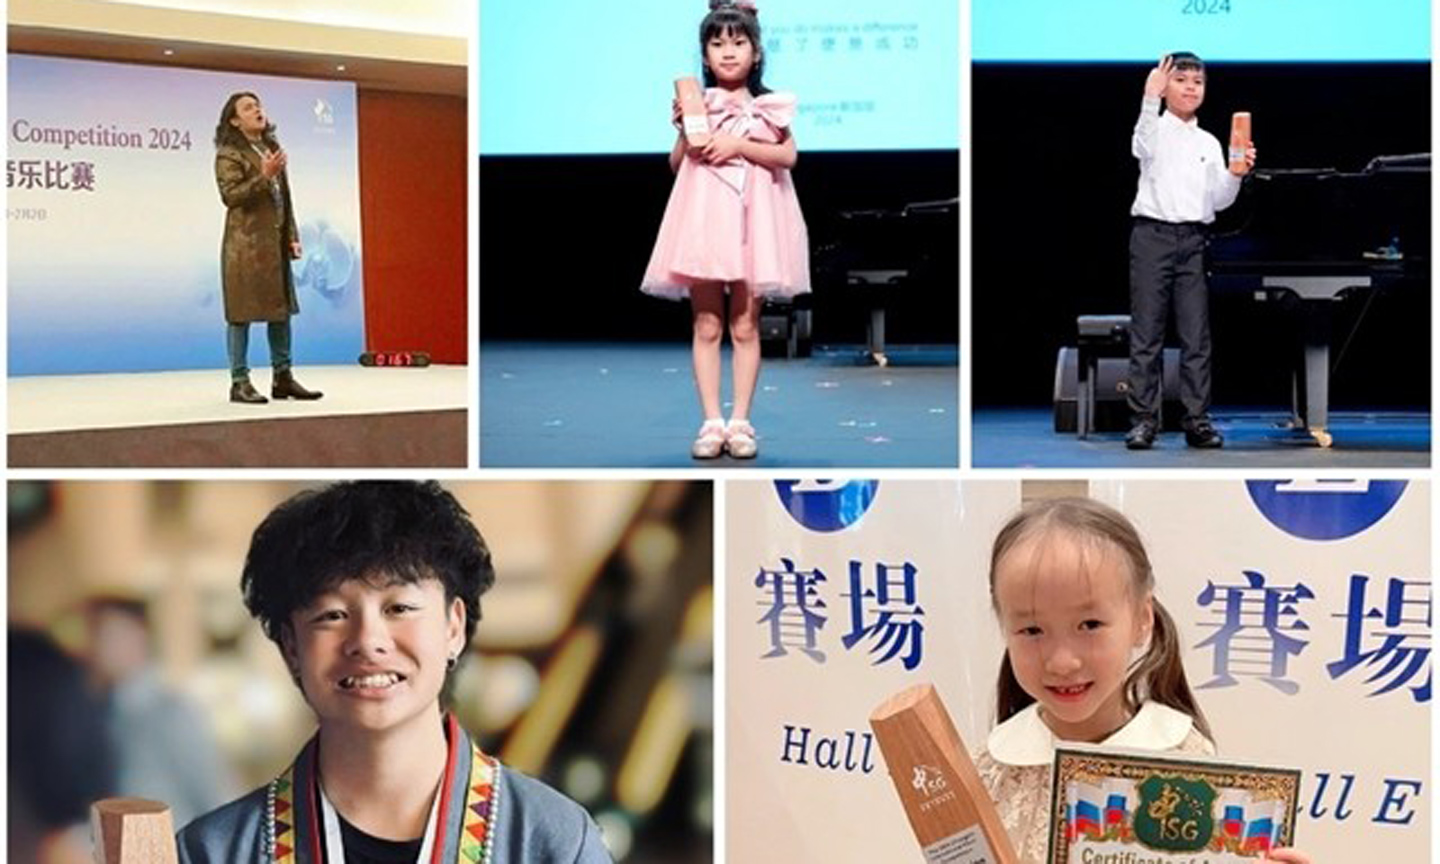 Five Vietnamese contestants win first prizes at the 18th ZhongSin International Music Competition 2024. ̣(Photo courtesy of ZhongSin International Music Competition).